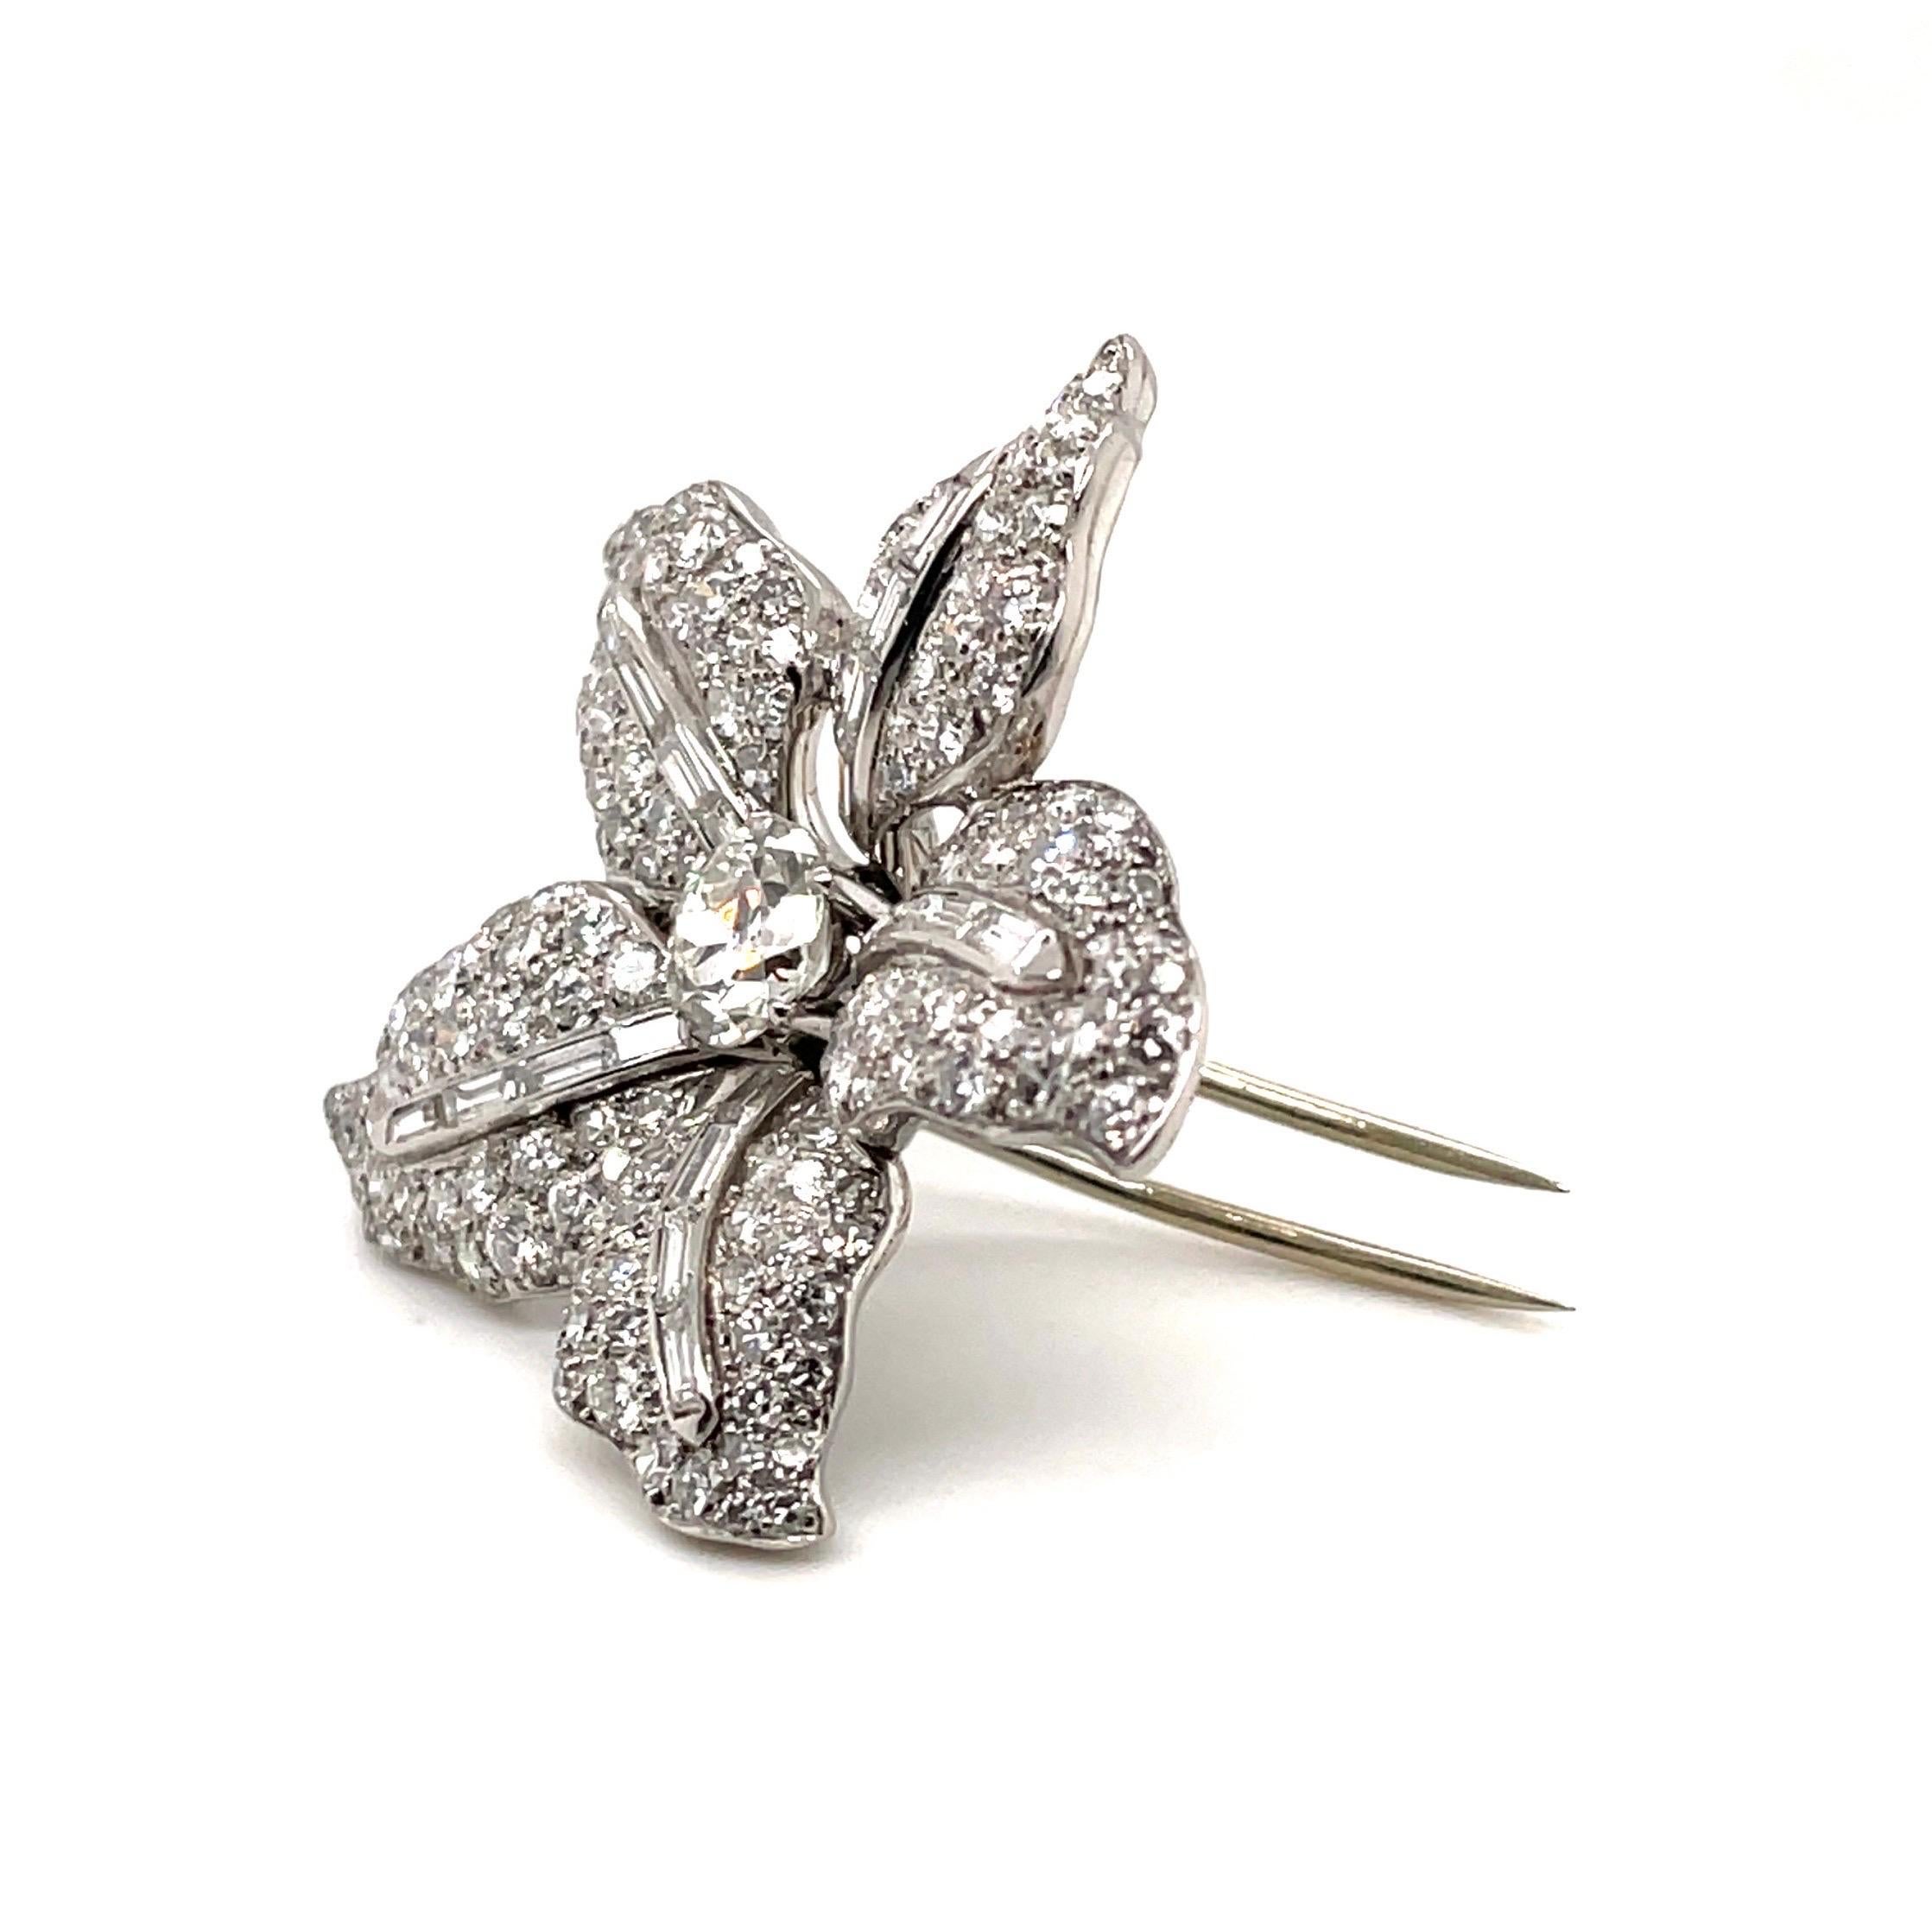 Elegant 950 platinum and diamond flower clip brooch, circa 1950. 

Classical, timeless clip brooch designed as a finely sculpted flower, centering upon one old-european-cut diamond of circa 0.9 carats, the leaves pavé-set with brilliant- and